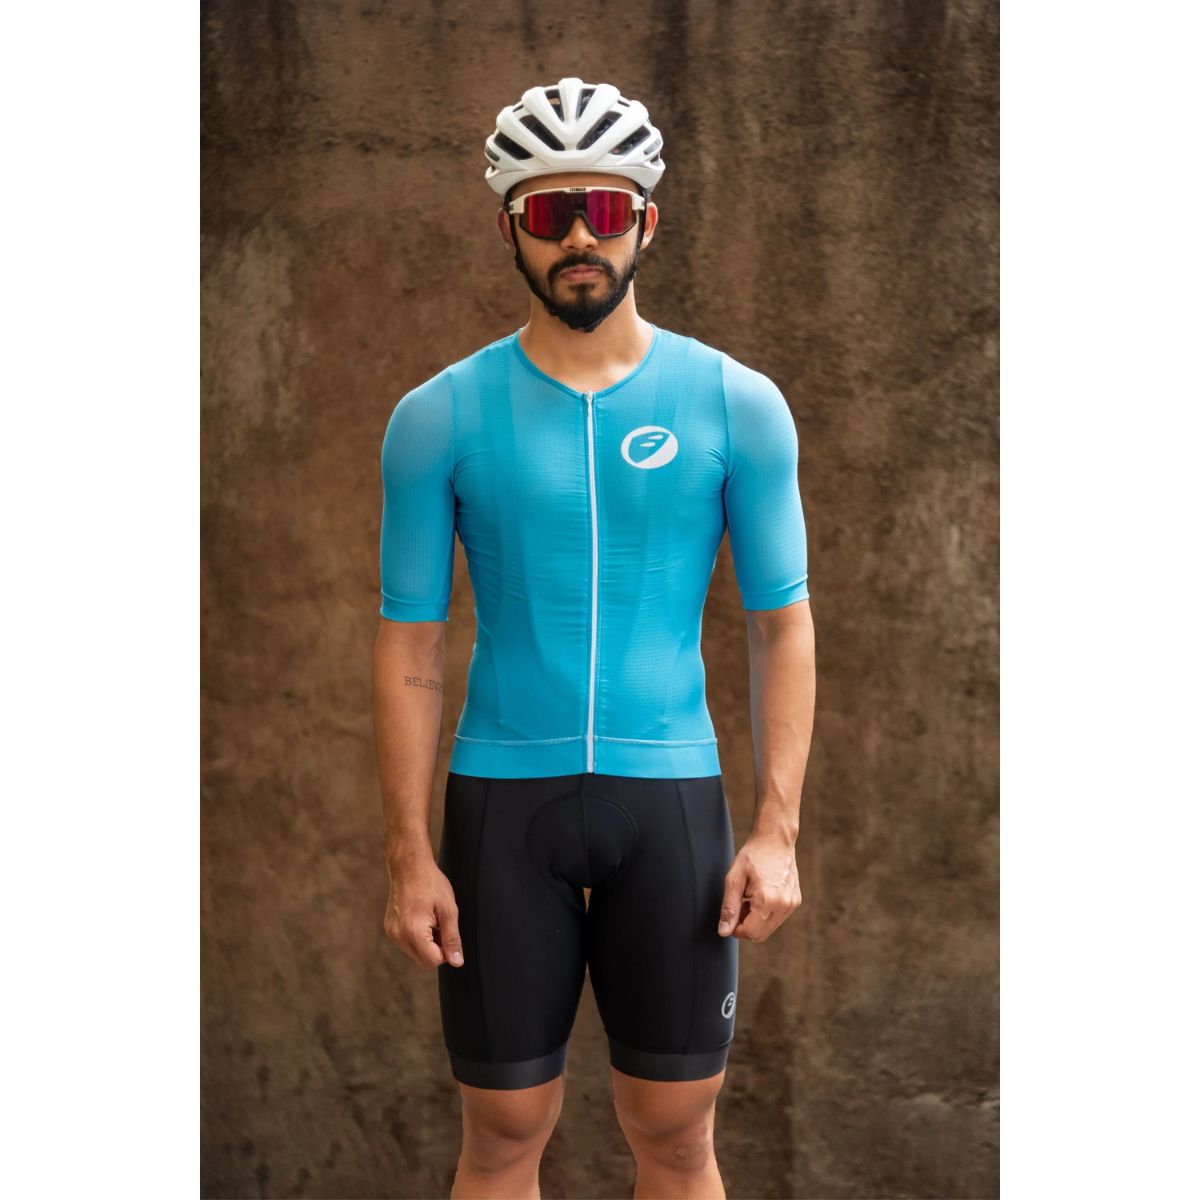 Apace Mens Cycling Jersey - Podium-fit - Ocean Blue 1